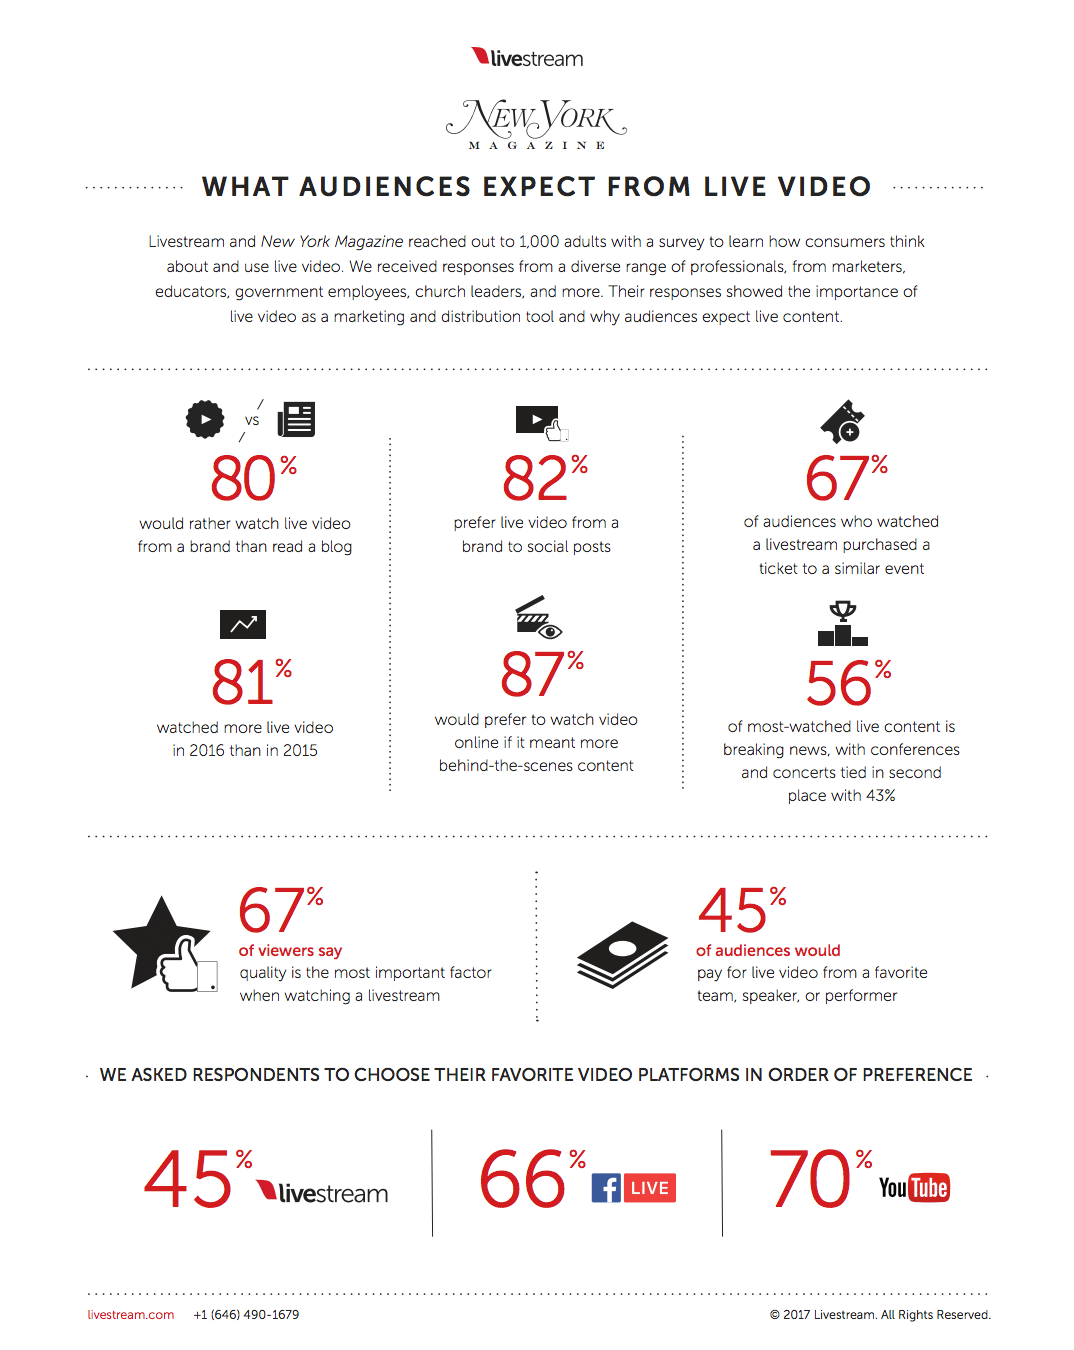 67% of livestream viewers purchase a ticket to a similar event.